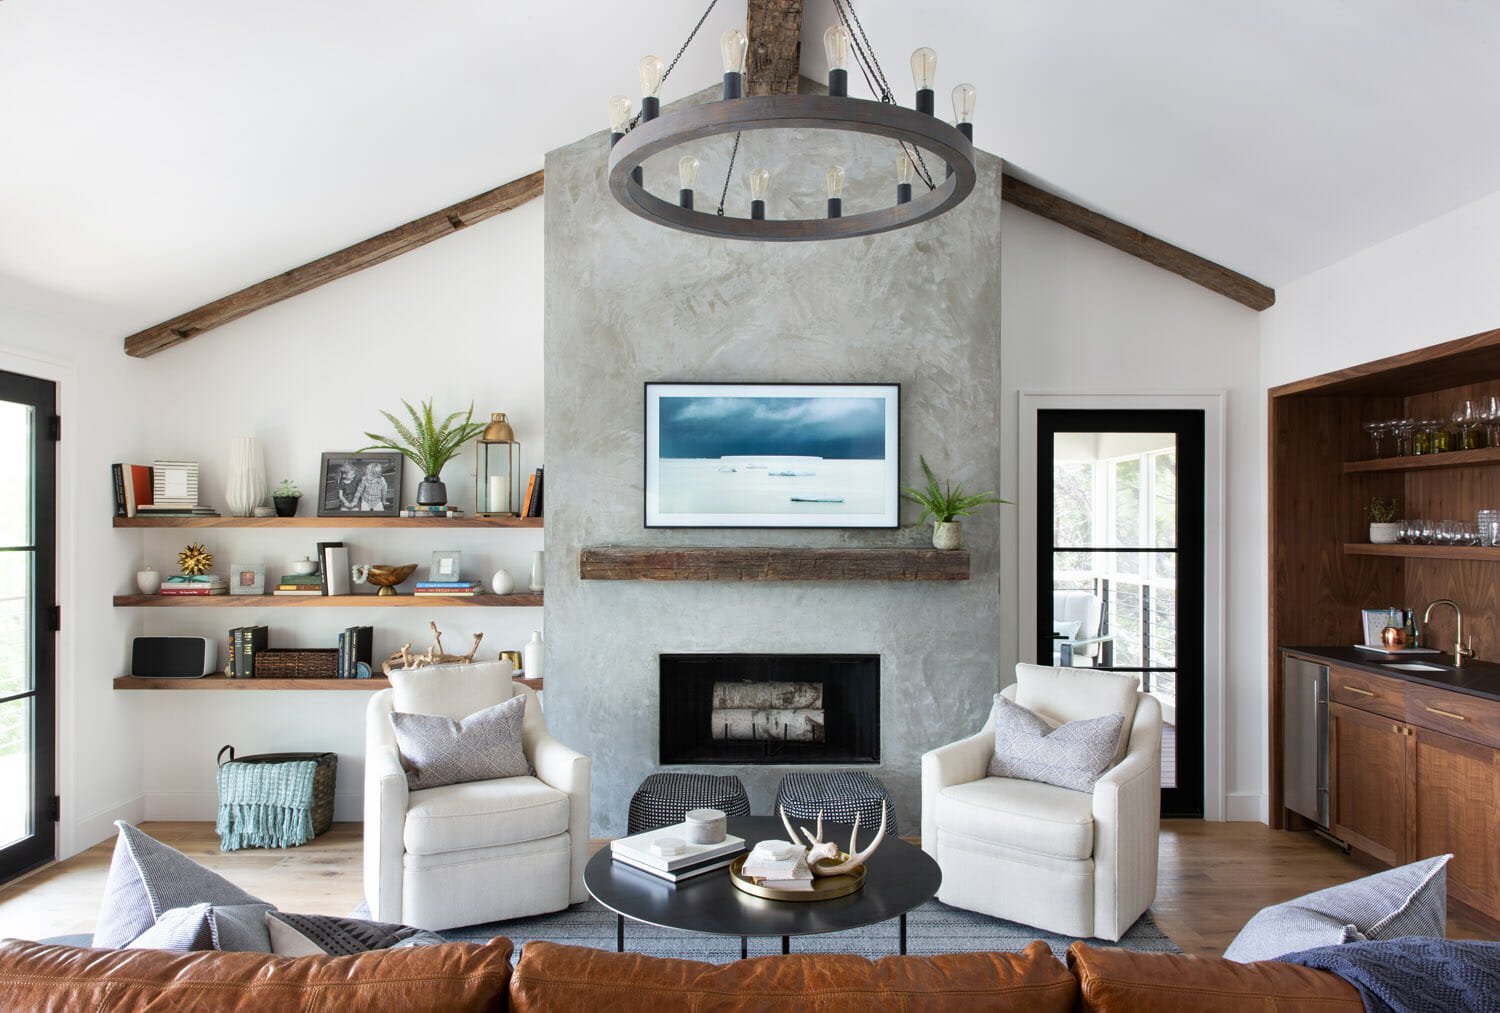 pushhome.net – Best Modern Farmhouse Decor for Every Room of the House